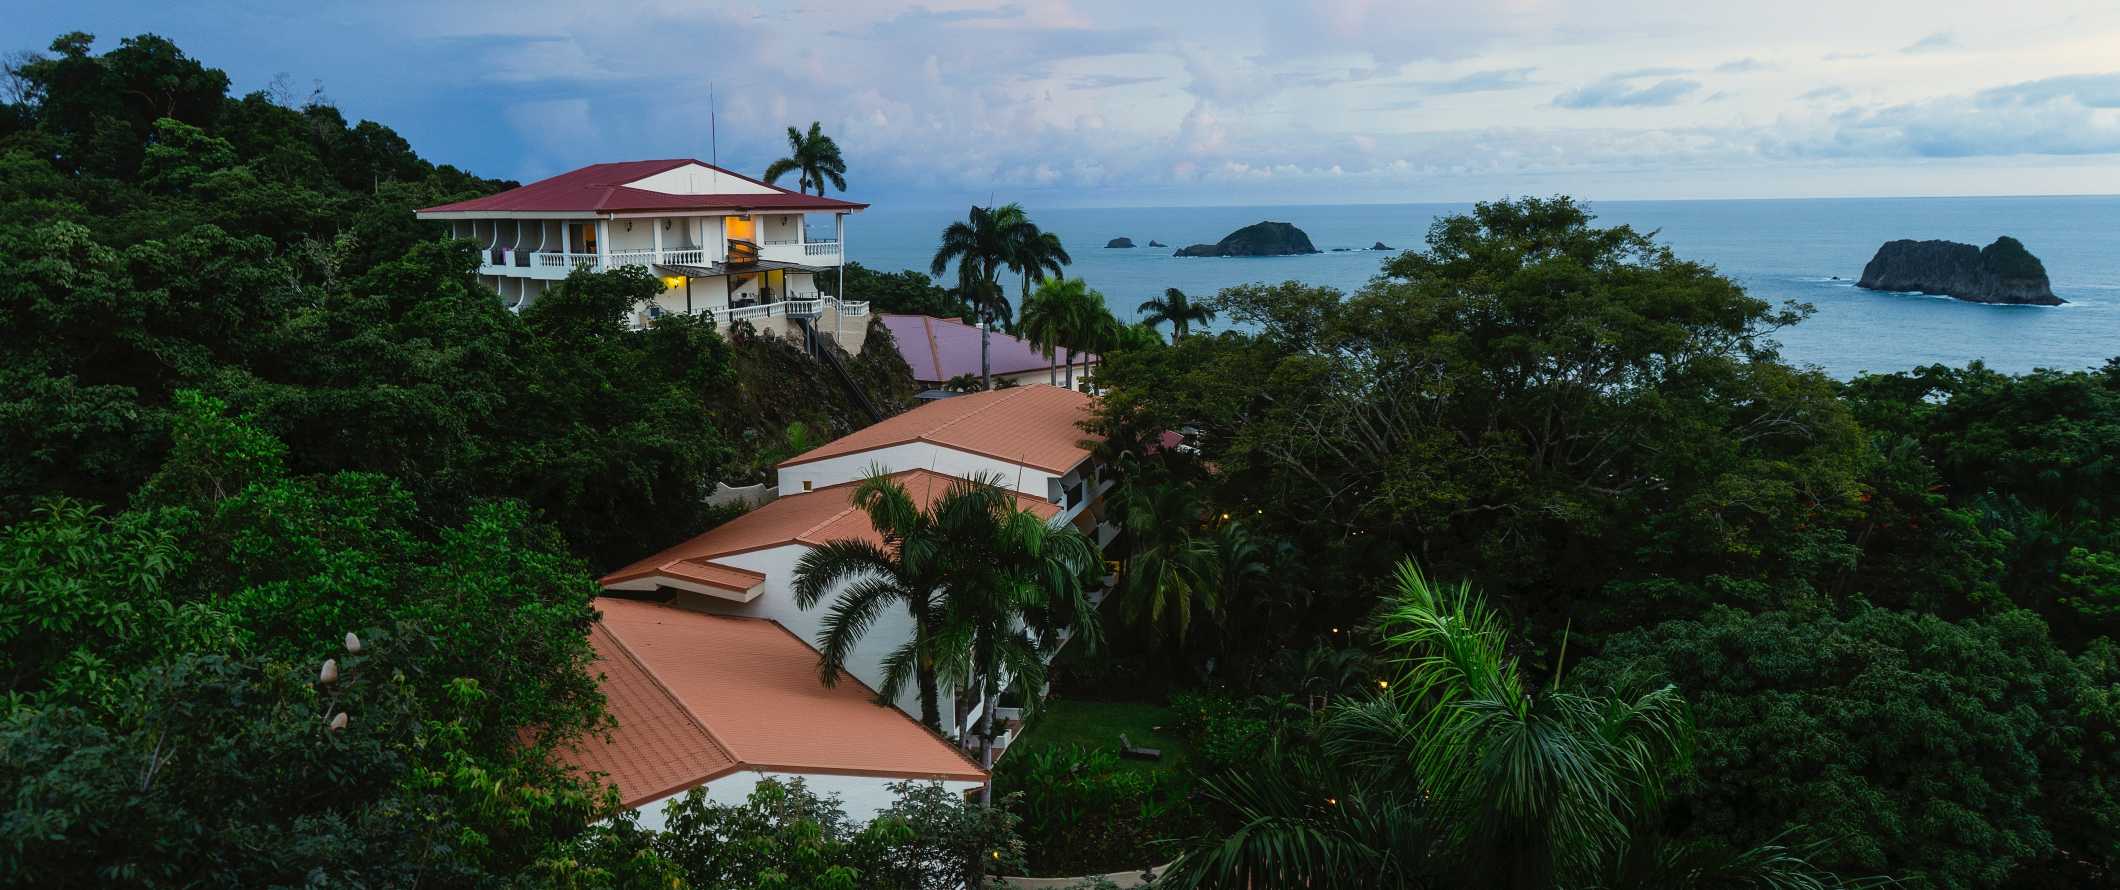 Small resort and hotel buildings nestled in the rainforest with the ocean in the background in Manuel Antonio, Costa Rica